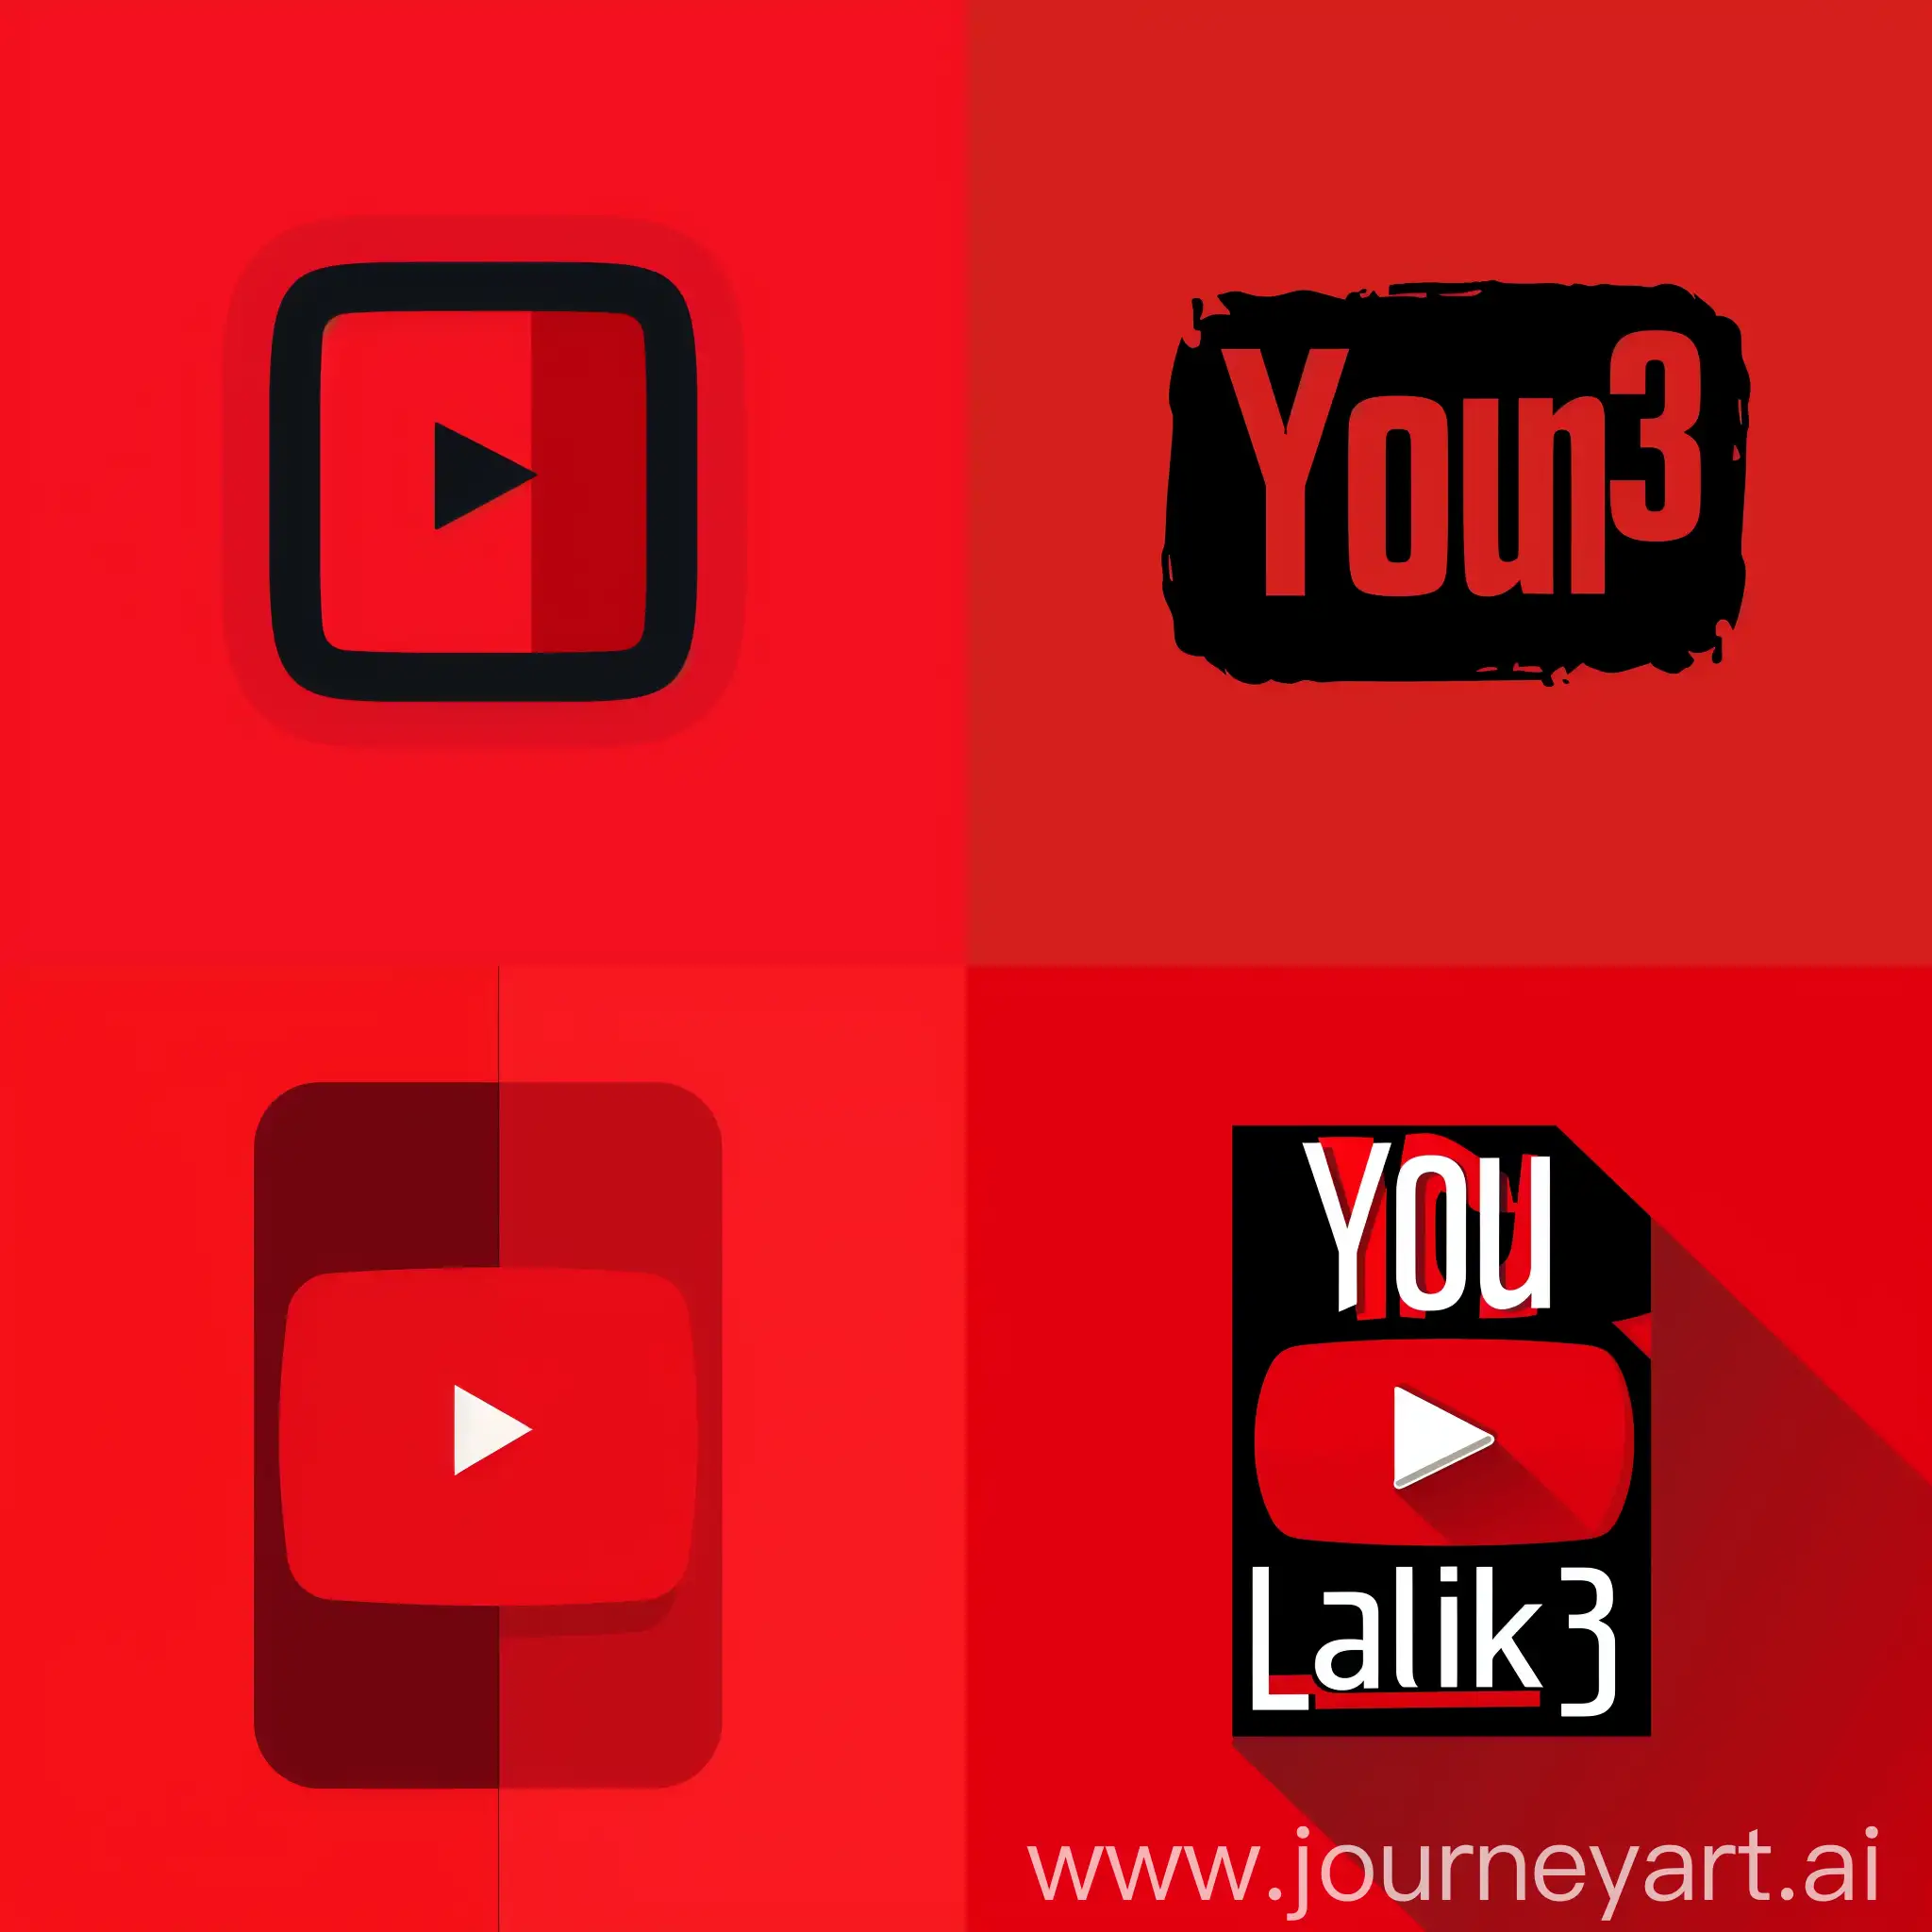 Vibrant-YouTube-Header-with-LapLike3-Nickname-in-Red